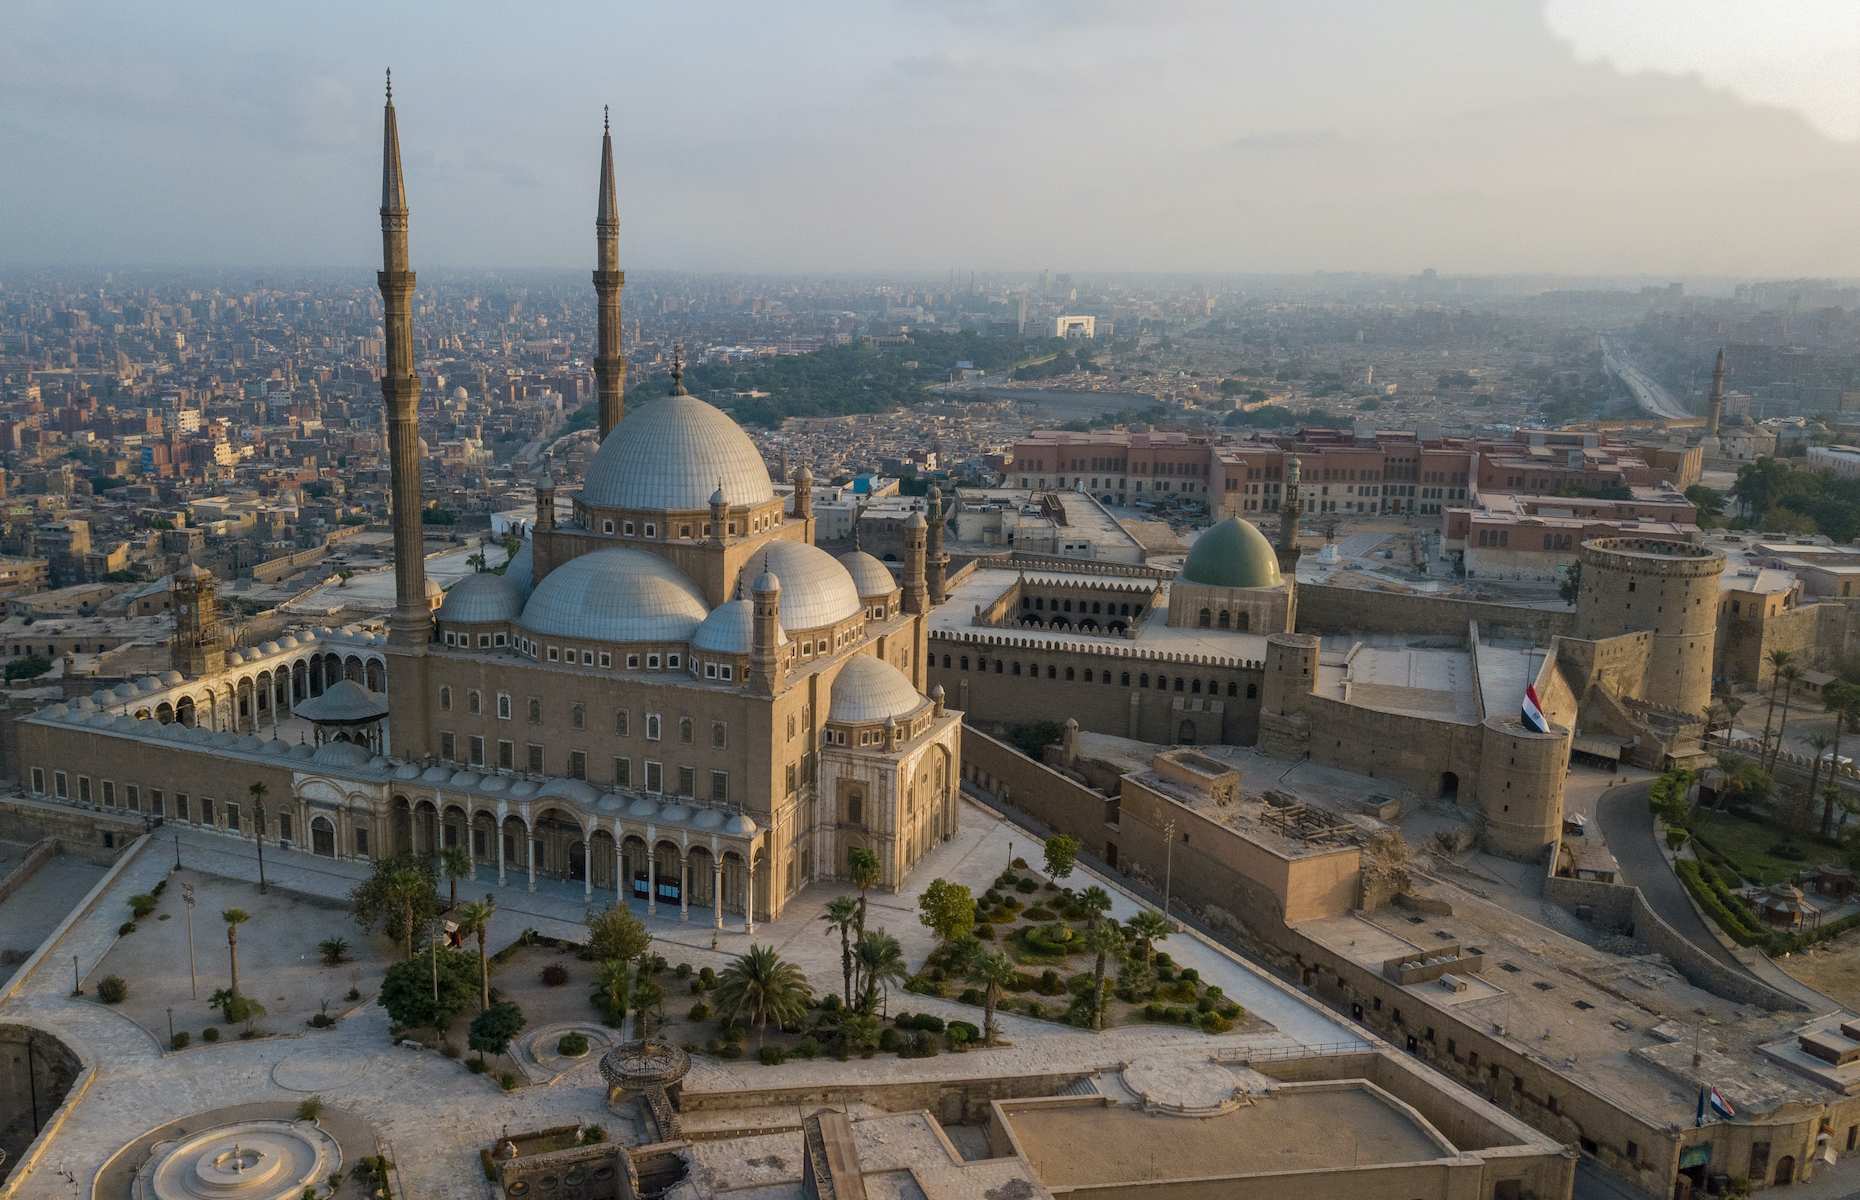 <p>If there’s one mosque that immediately catches the eye in Egypt’s capital, nicknamed the “<a href="https://www.unesco.org/archives/multimedia/document-874" rel="noreferrer noopener">city of a thousand minarets</a>,” it’s the one known as Muhammad Ali. Nestled on top of a hill with a panoramic view of the city, this Ottoman-style structure was built in the 19th century within the walls of Saladin’s Citadel alongside older mosques and medieval fortifications. The site is Cairo’s <a href="https://theankh.net/egypt-destinations/cairo-citadel-saladin-mohamed-ali/" rel="noreferrer noopener">most visited Islamic complex</a>.</p>